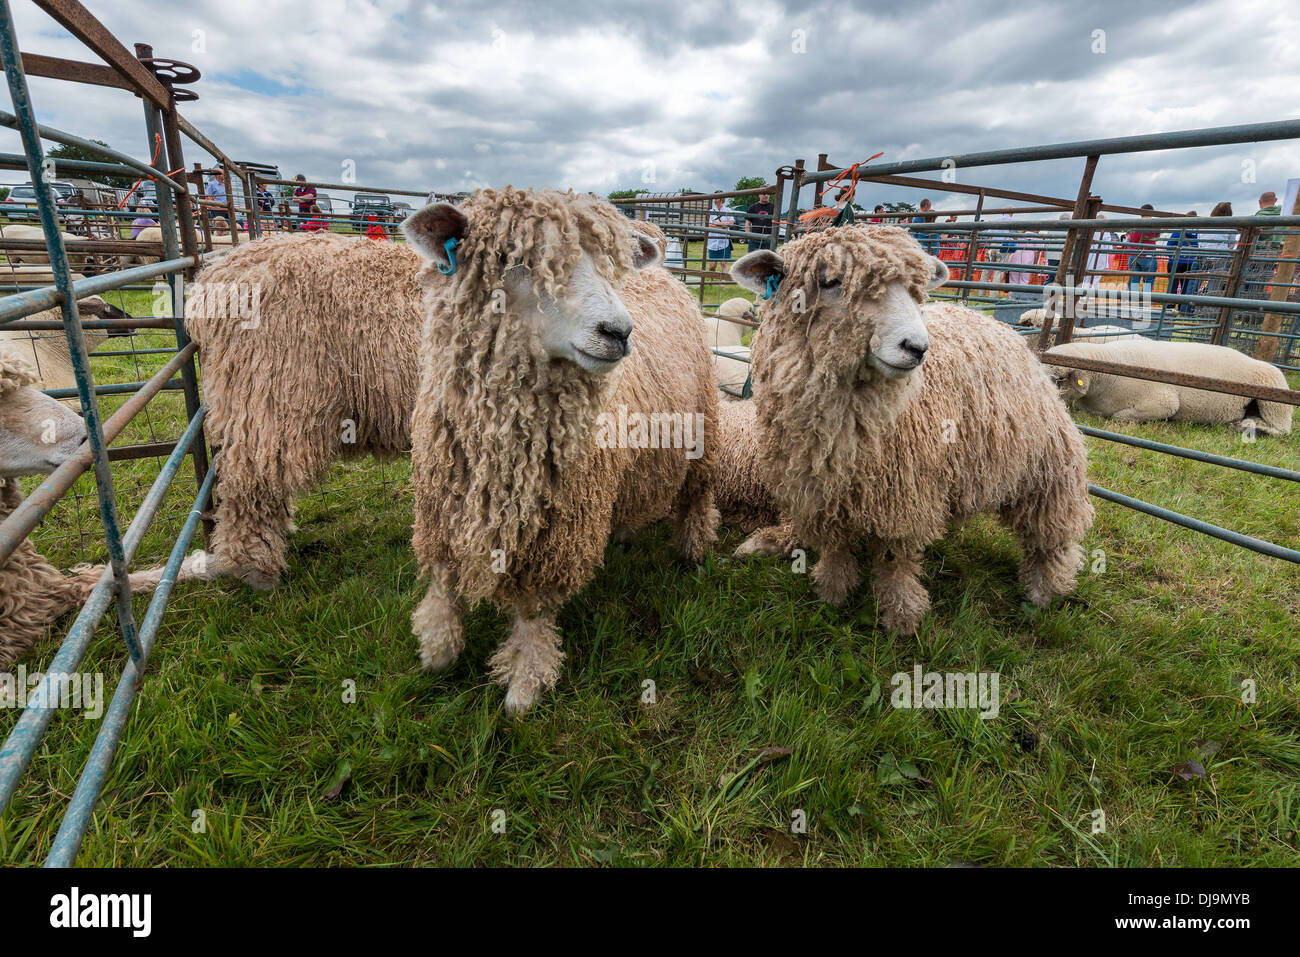 LINCOLN LONGWOOL SHEEP IN PEN AT AGRICULTURAL SHOW INCHEPSTOW WALES UK Stock Photo